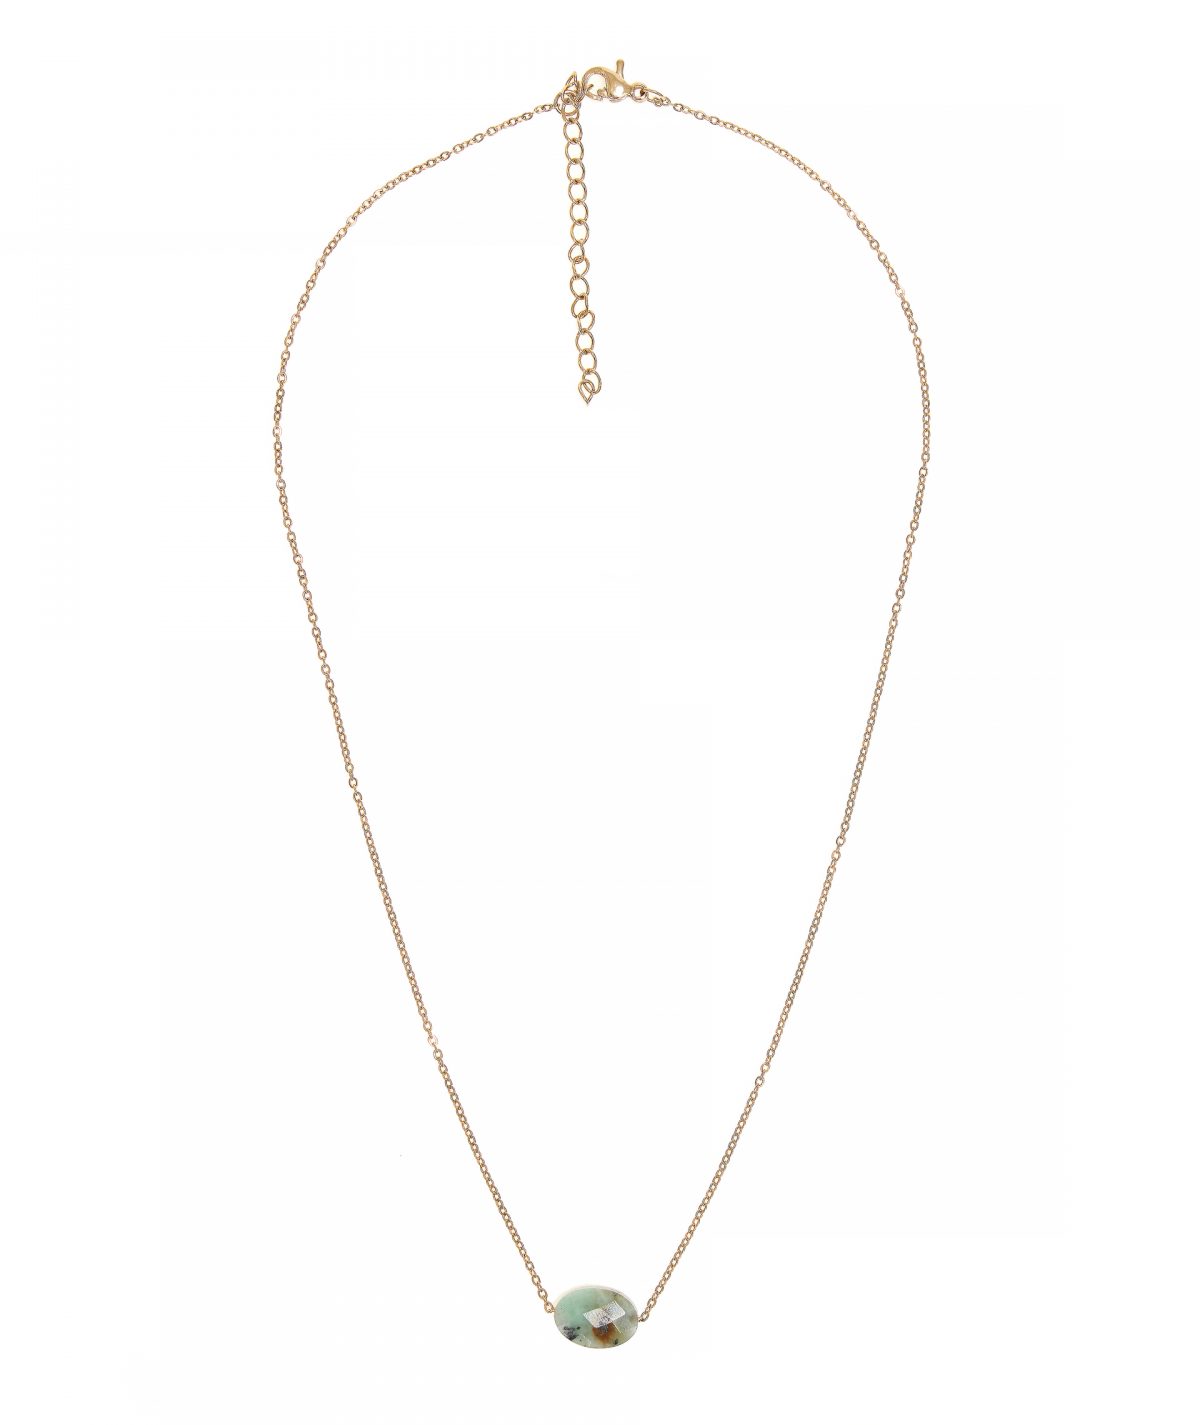 Oval Stone Necklace by TFD